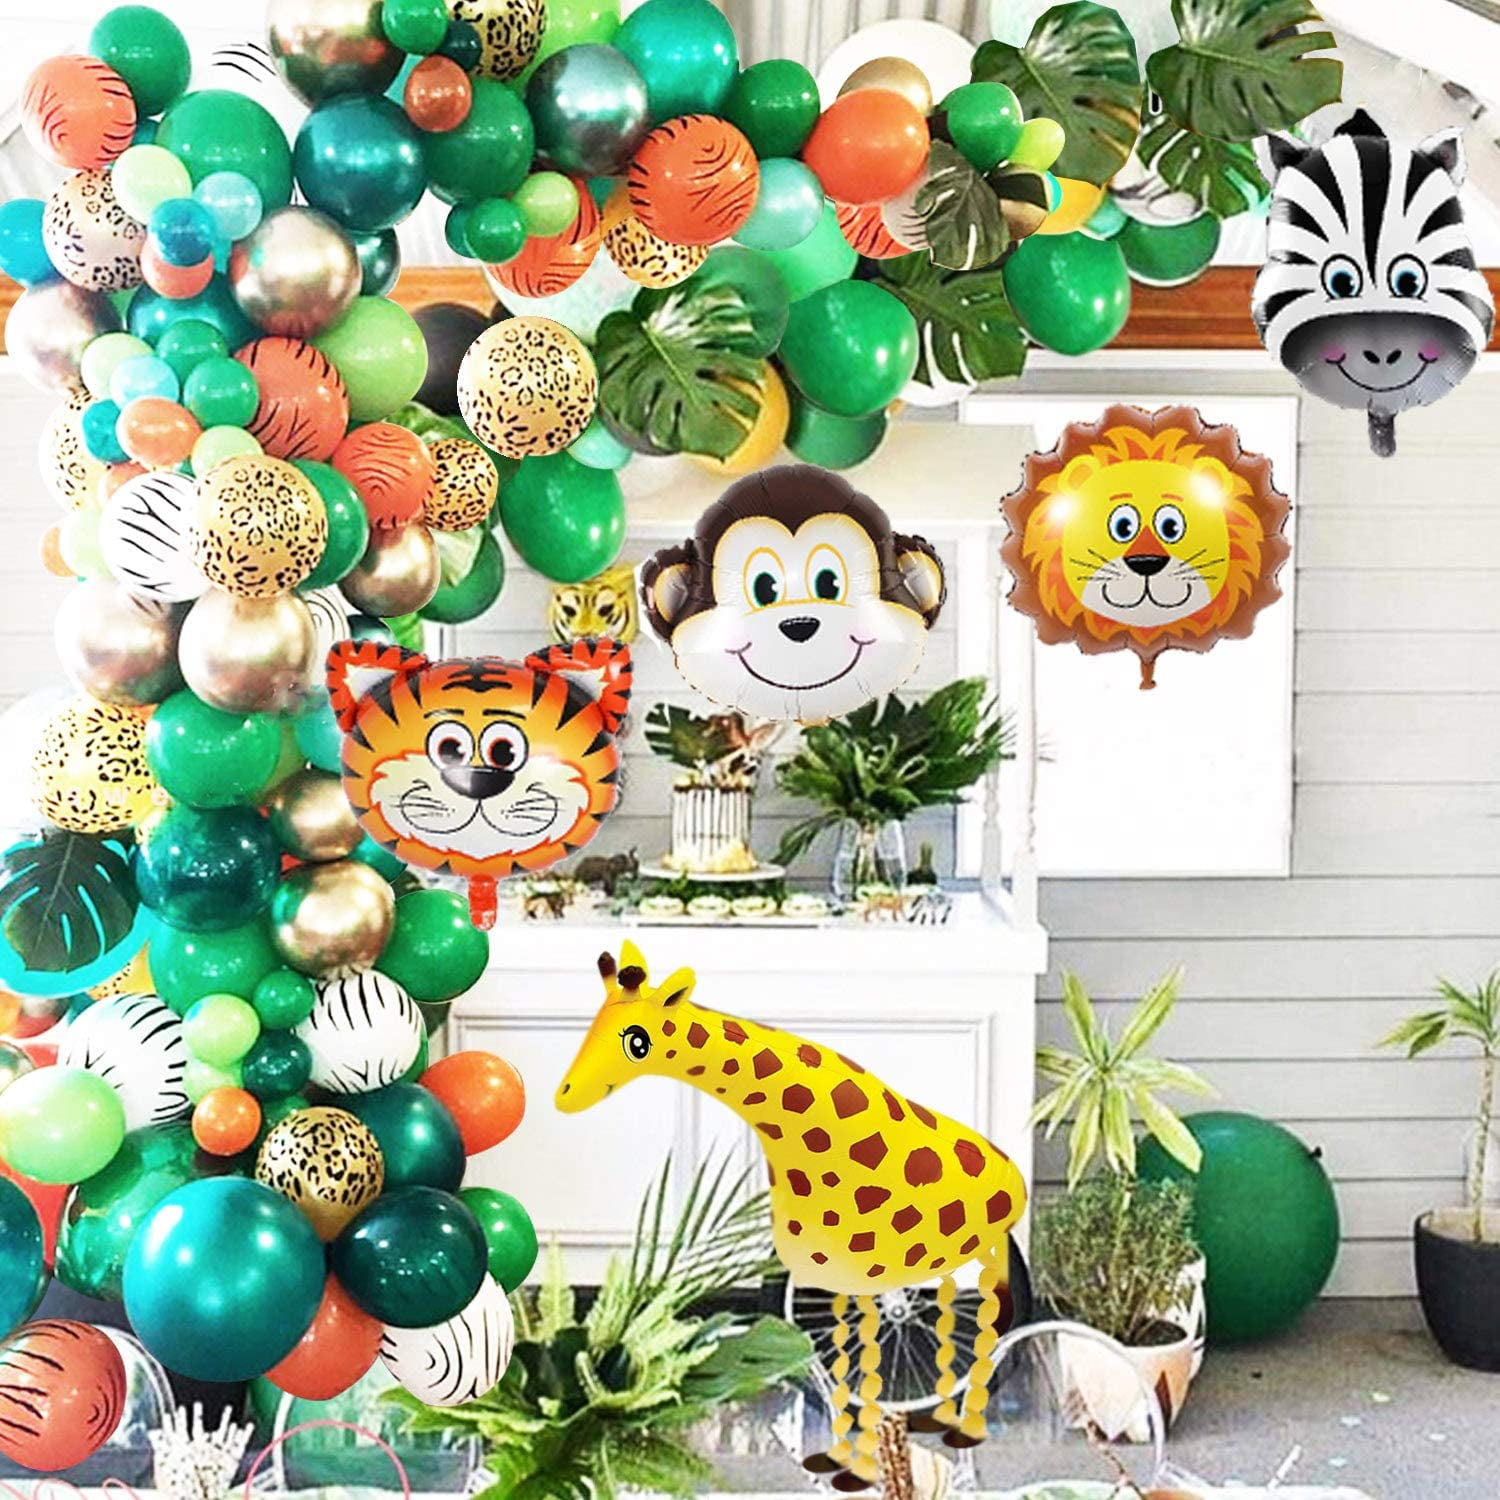 Jungle Animal Birthday Party Decoration 135 Pcs of Set Jungle Animal Themed Party Favors Include Jungle animals Balloons Paper Pompoms Flower Great For Your Kids Party Happy Birthday Balloons,Backdrop 